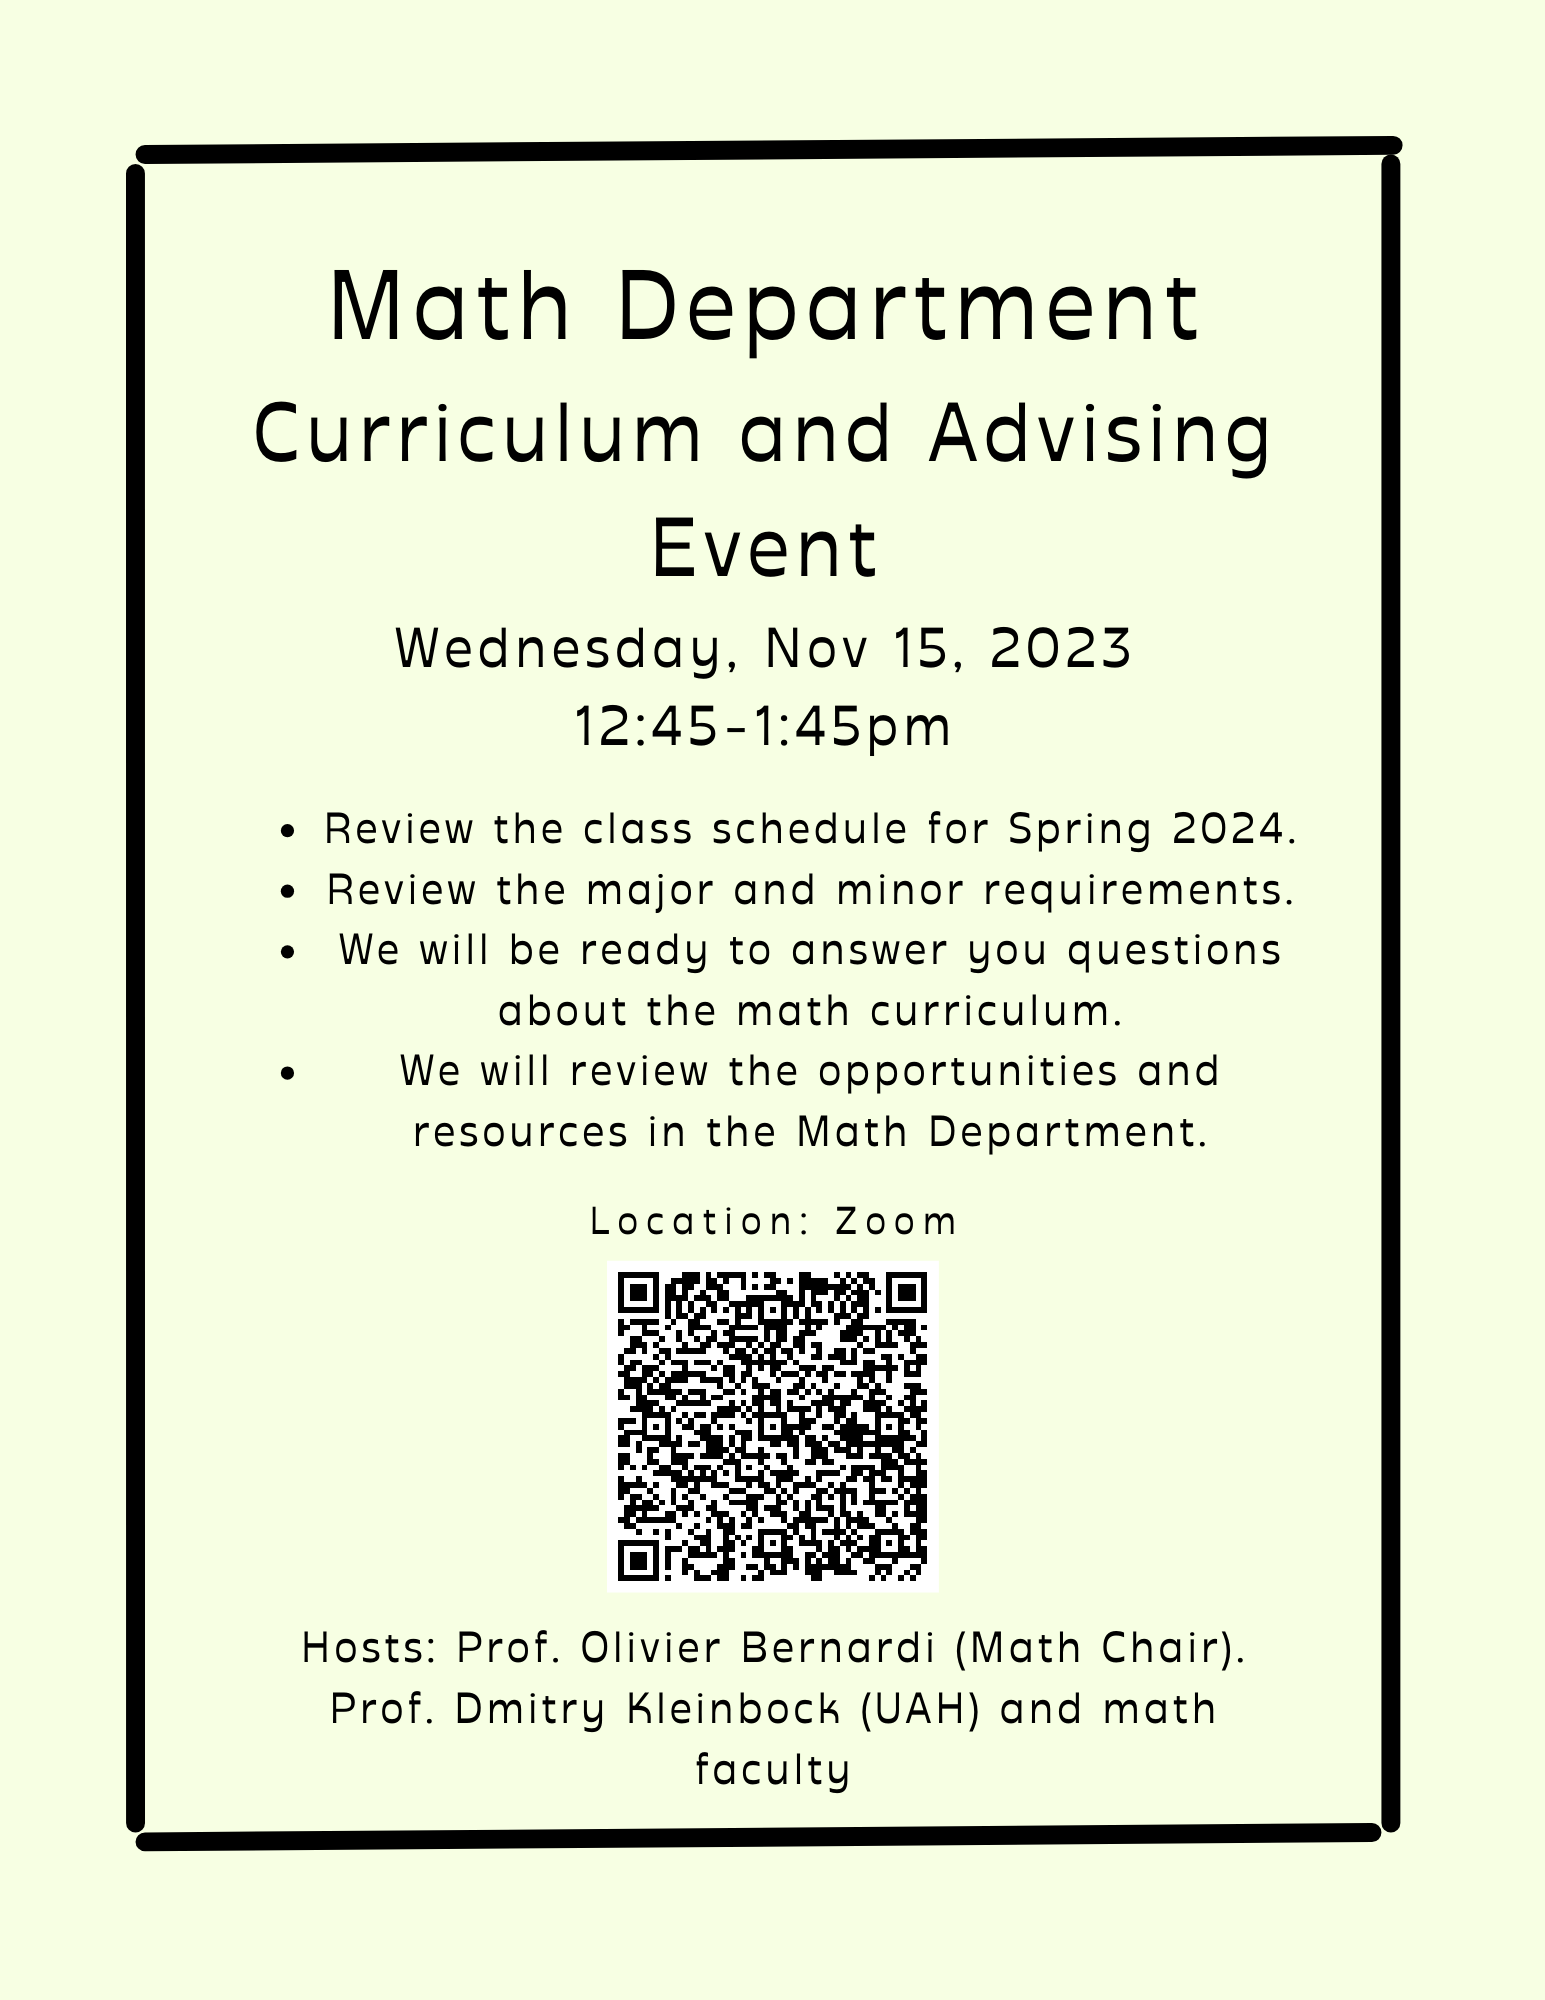 Math Department Curriculum and Advising Event Wednesday, Nov 15.2023 12:14-1:45pm -Review the class schedule for Spring 2024, - review the major and minor requirements. - We will be ready to answer your questions abound the math curriculum, - We will review the opportunities and resources in the Math Department. Location: Zoom. Hosts: Prof. Olivier Bernardi (Math Chair). Prof. Dmitry Kleinbock (UAH) and math faculty